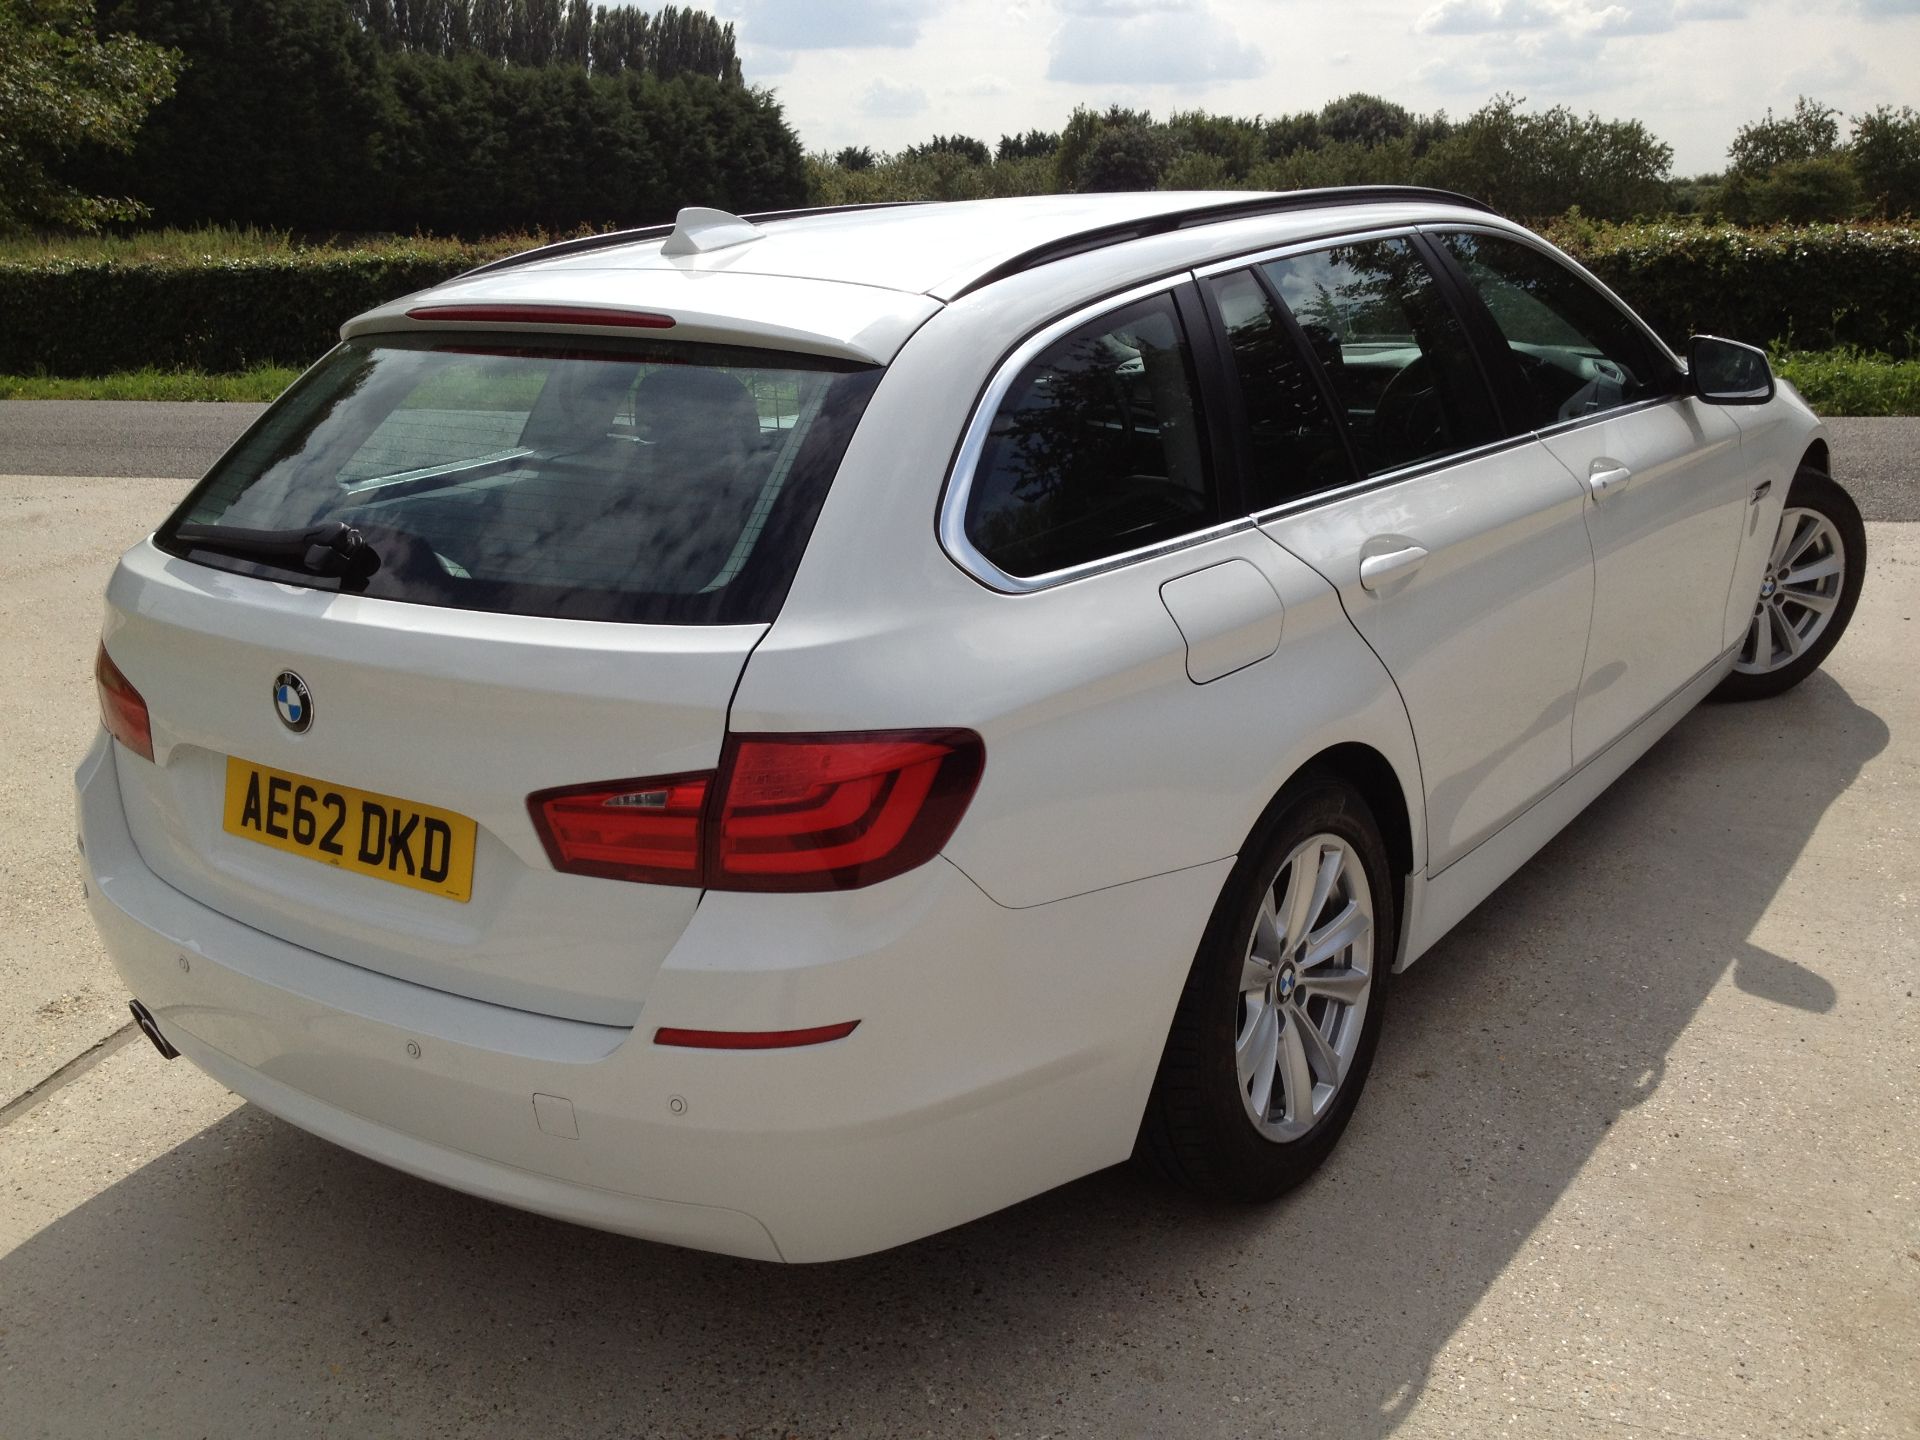 2012 bmw 530d diesel estate auto 52,000 miles 1 owner from new still under manufactures warranty - Image 4 of 9